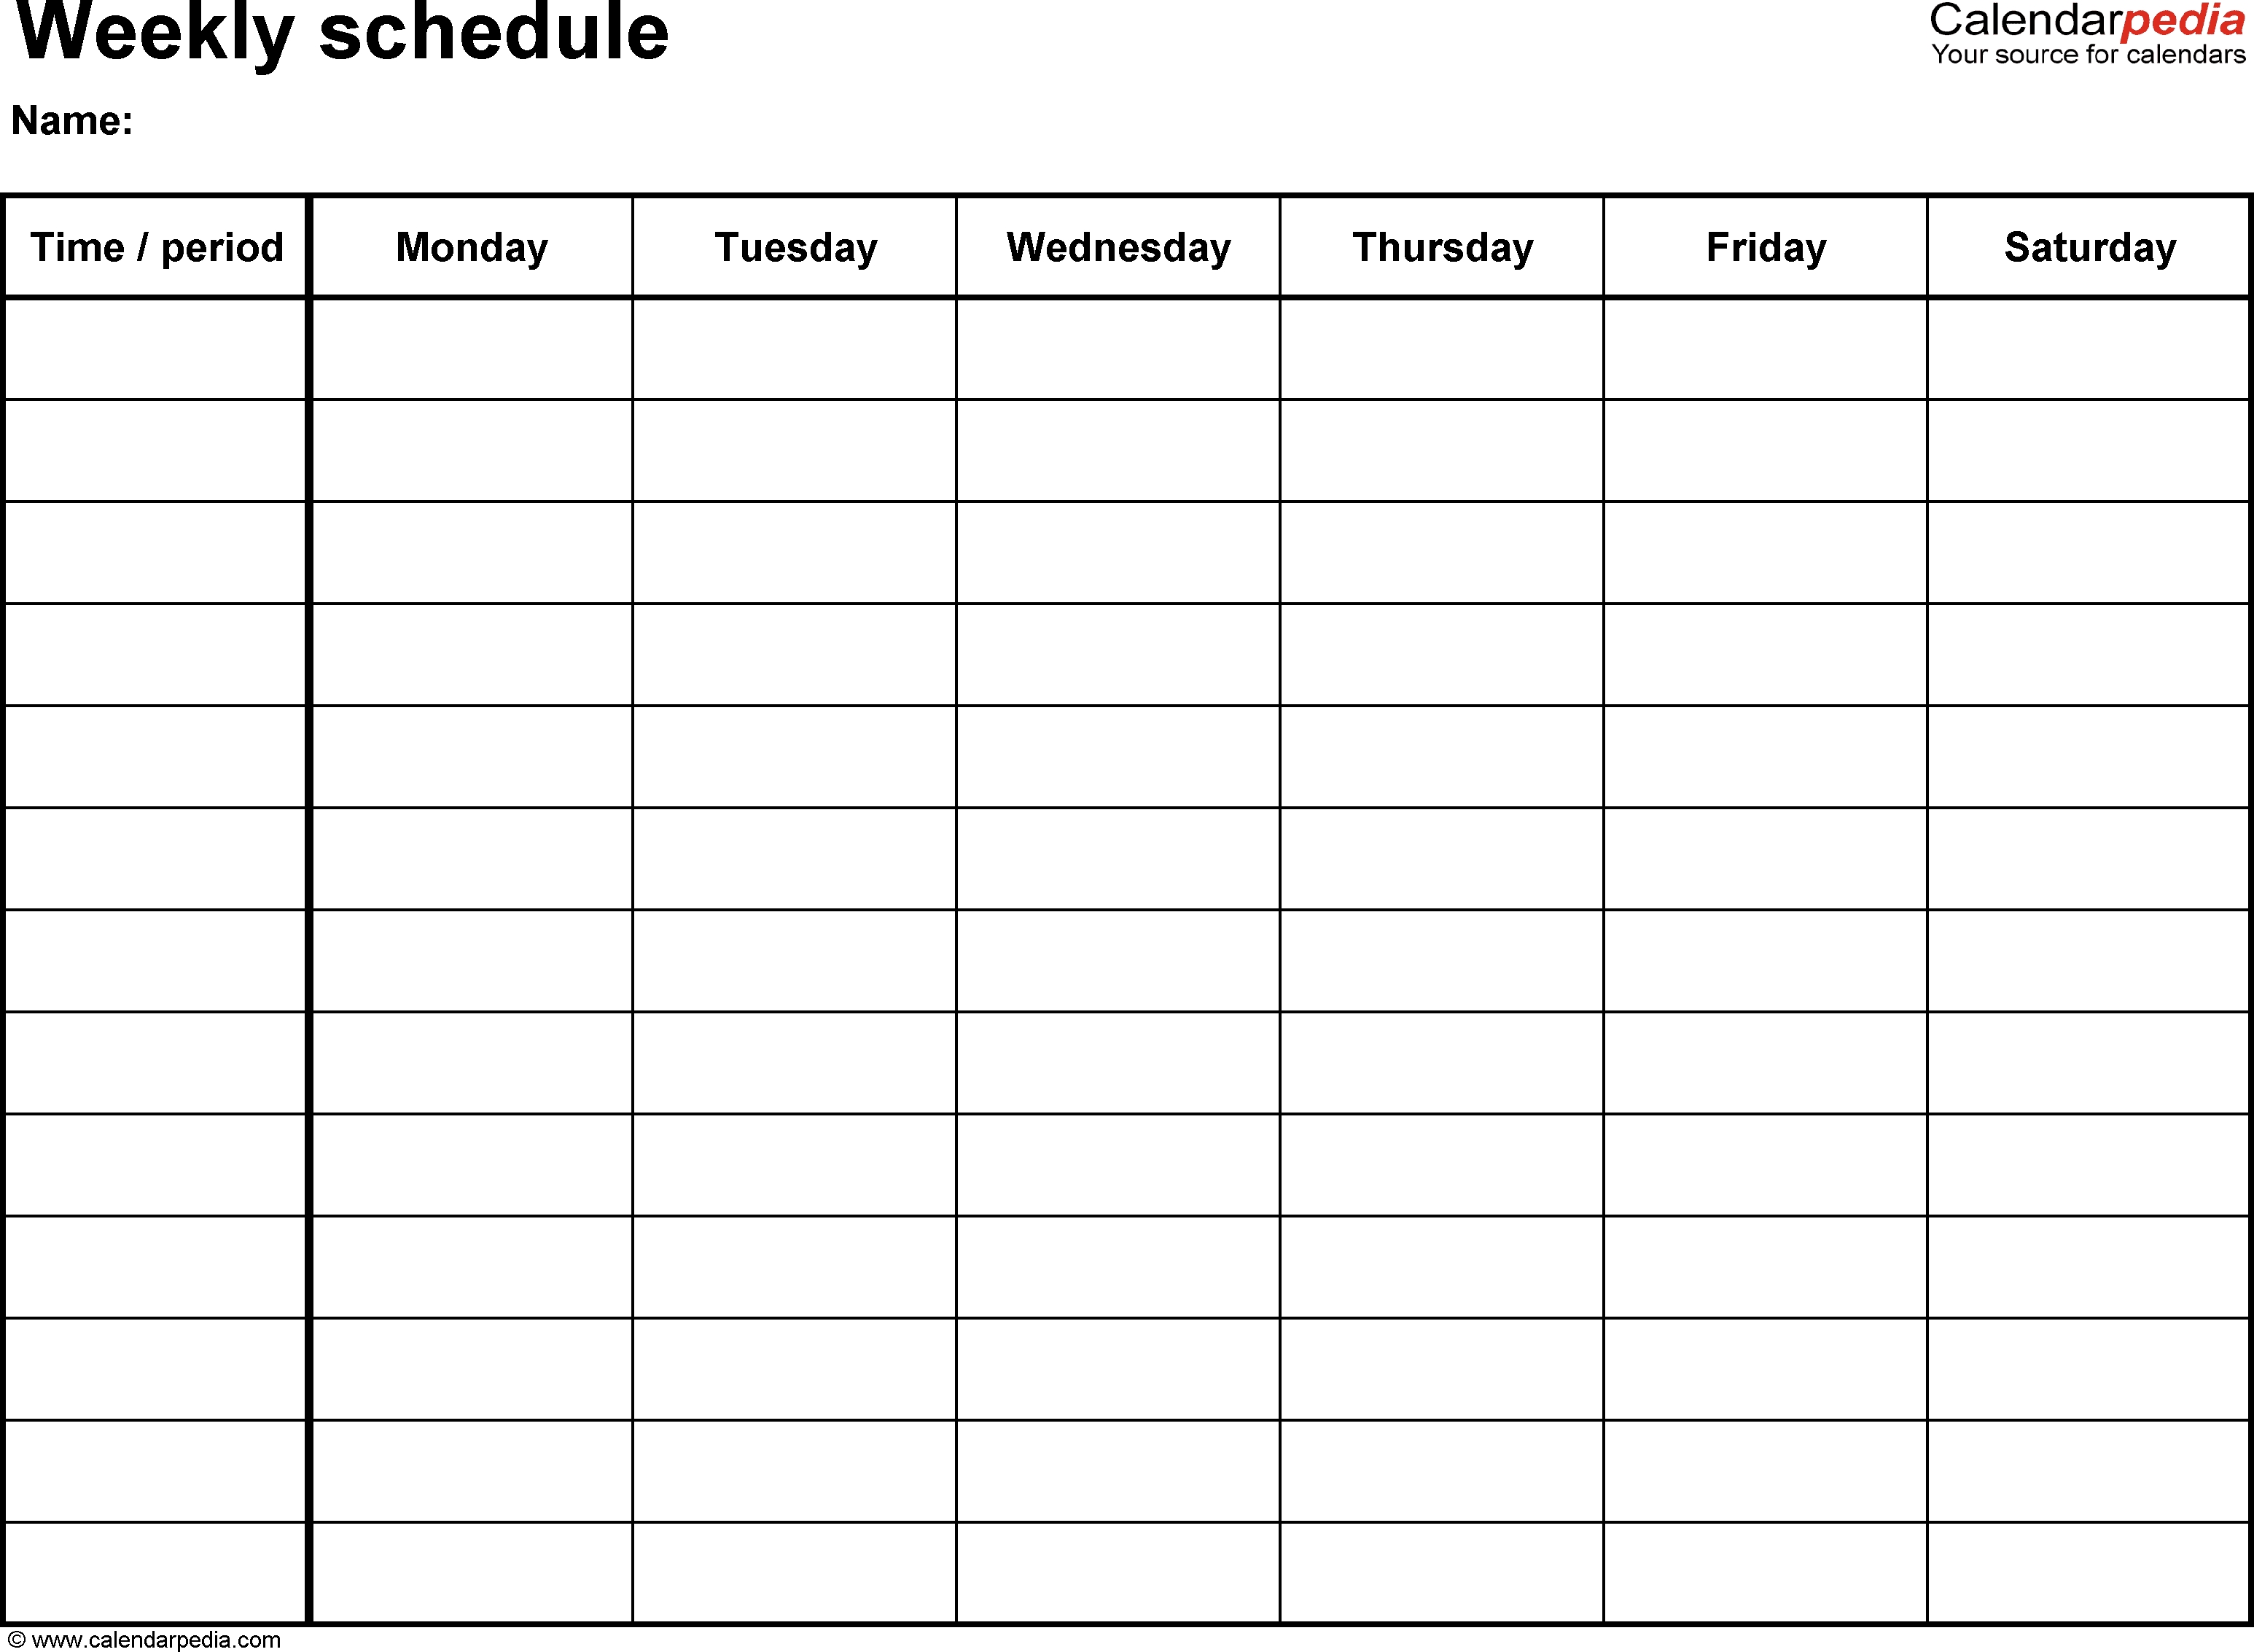 Free Weekly Schedule Templates For Word - 18 Templates-Monday To Friday Monthly Calendar